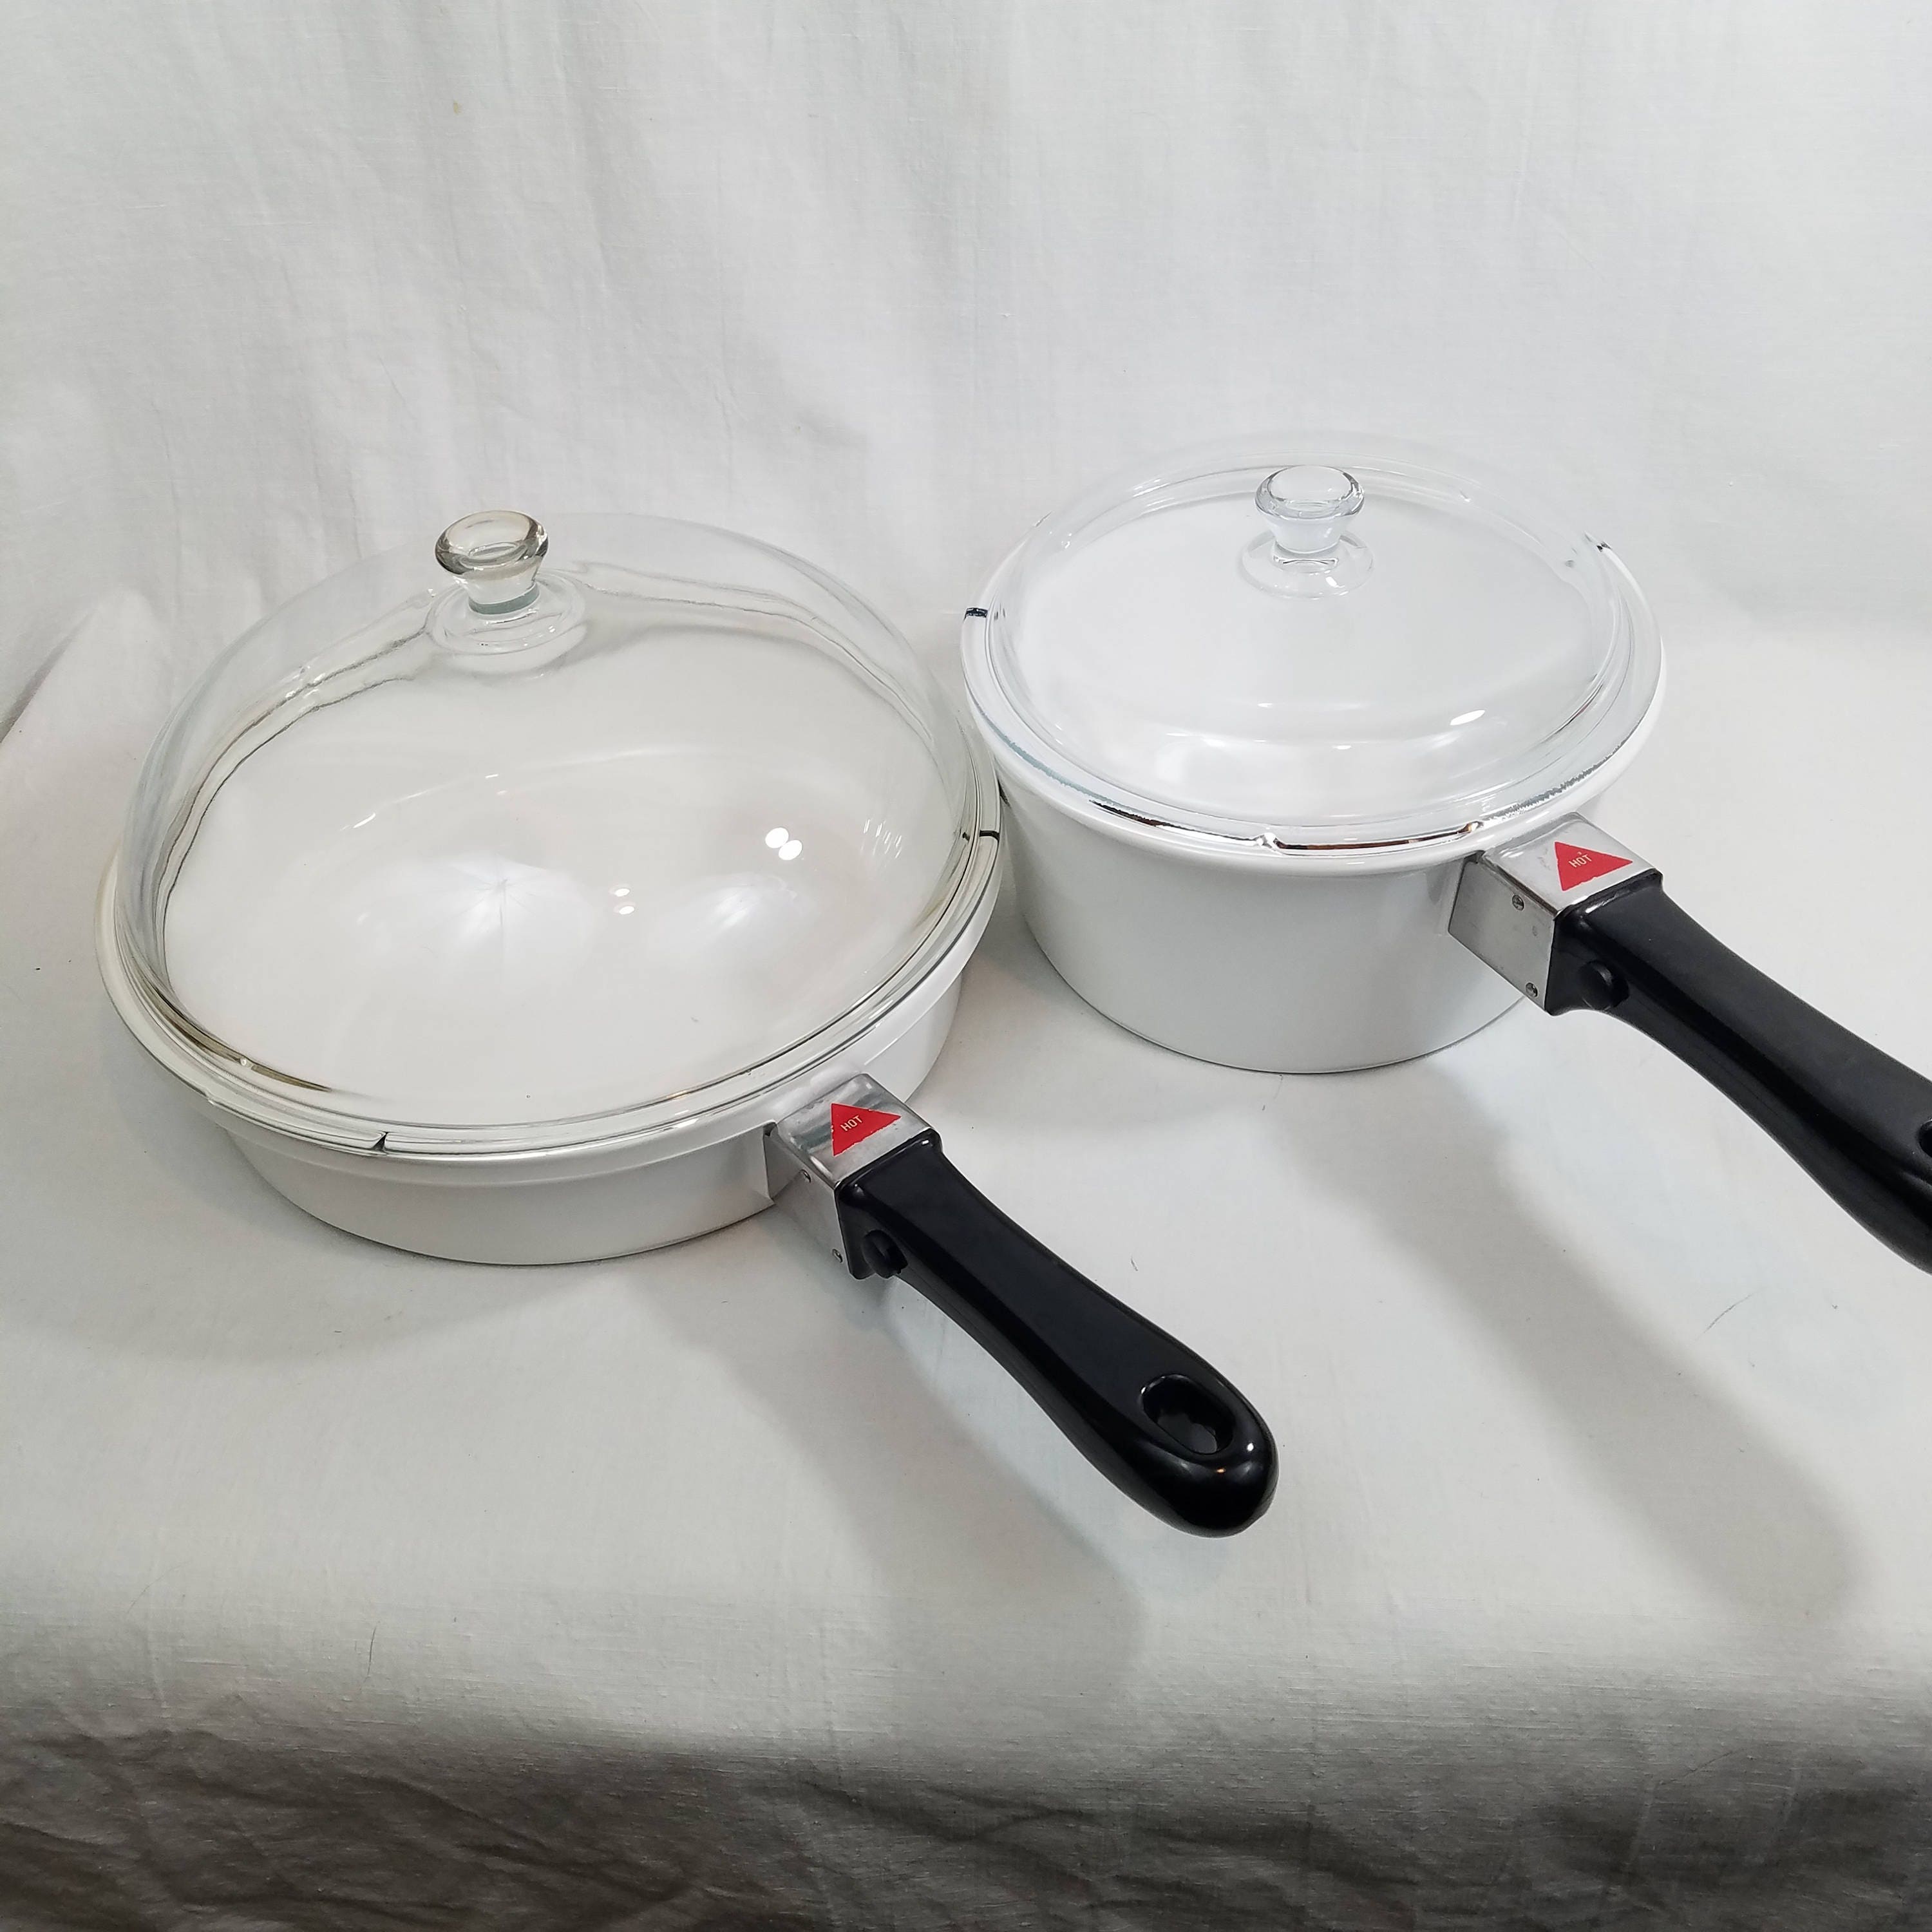 80s Nouveau Princess House 4 Piece Cookware Made in France 10 1/2 Fry Pan  With Dome Lid and 2 Qt. Saucepan With Lid & Black Handles 